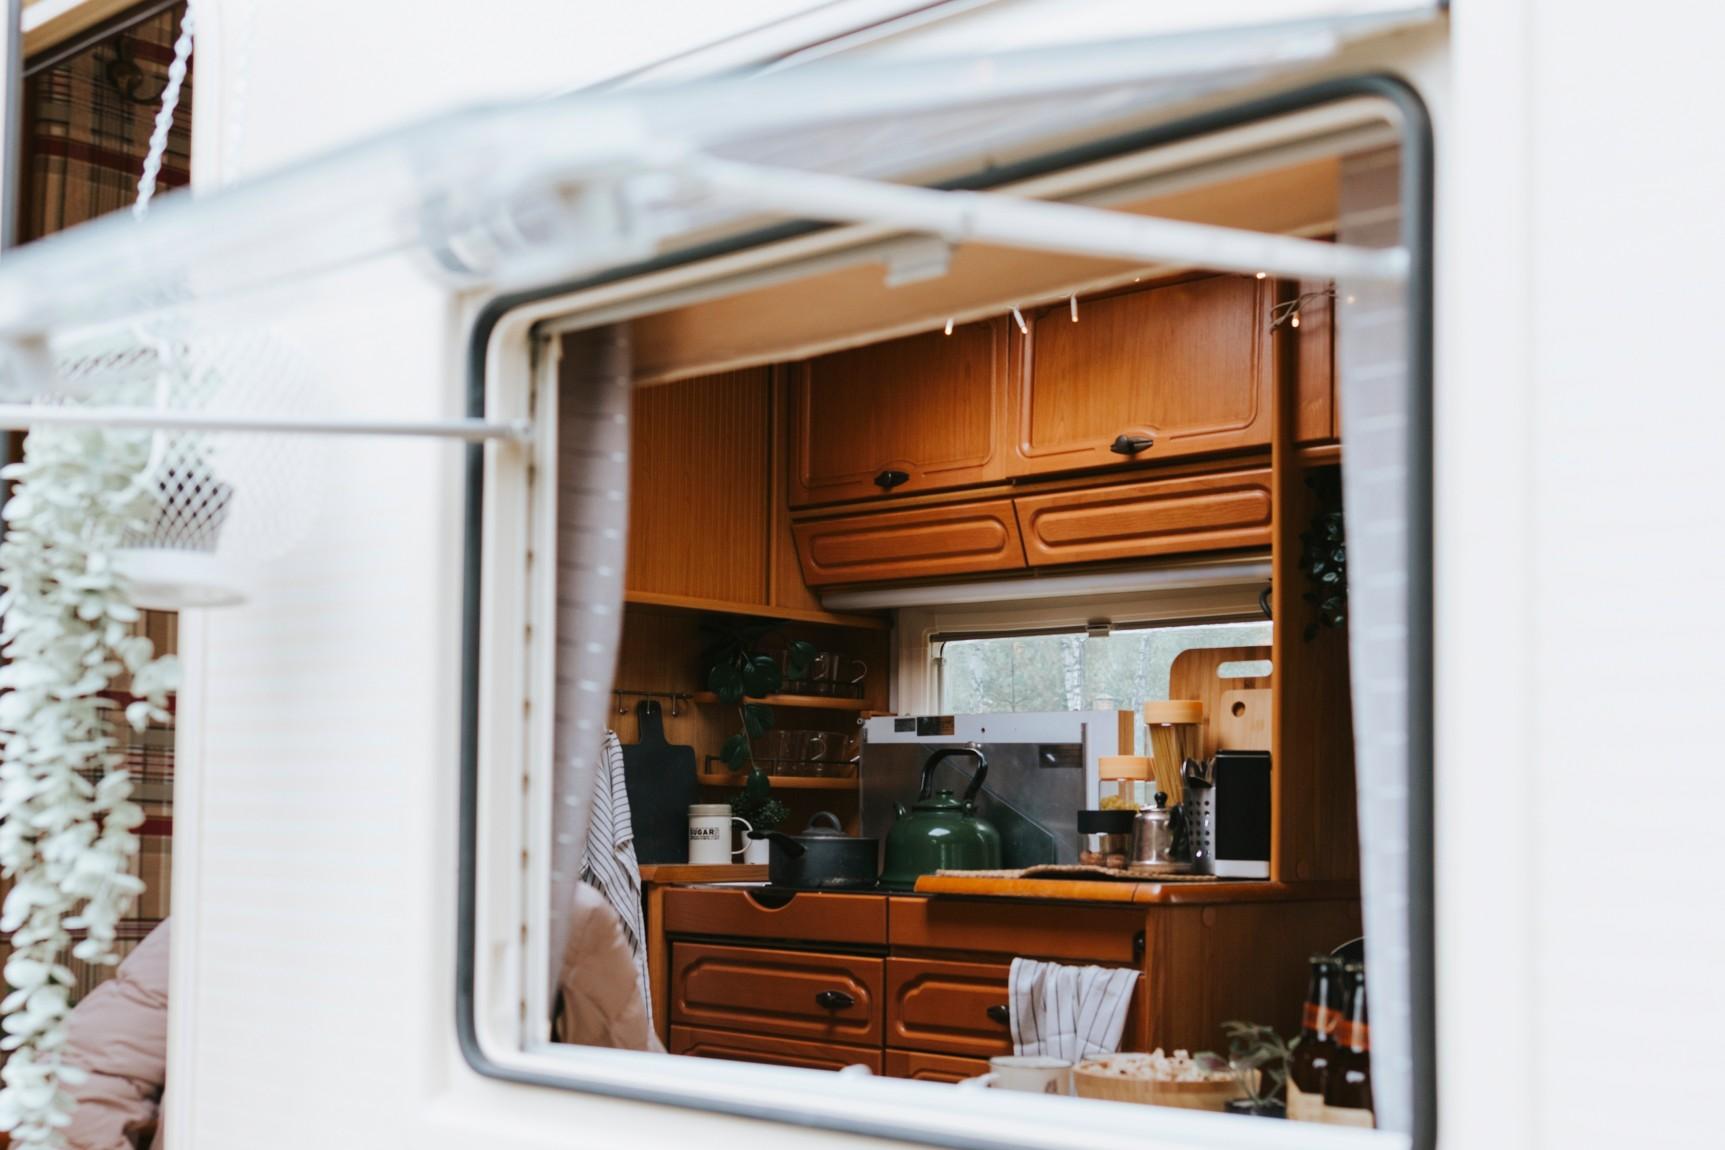 There are a lot of options available when it comes to interior space on an RV. 